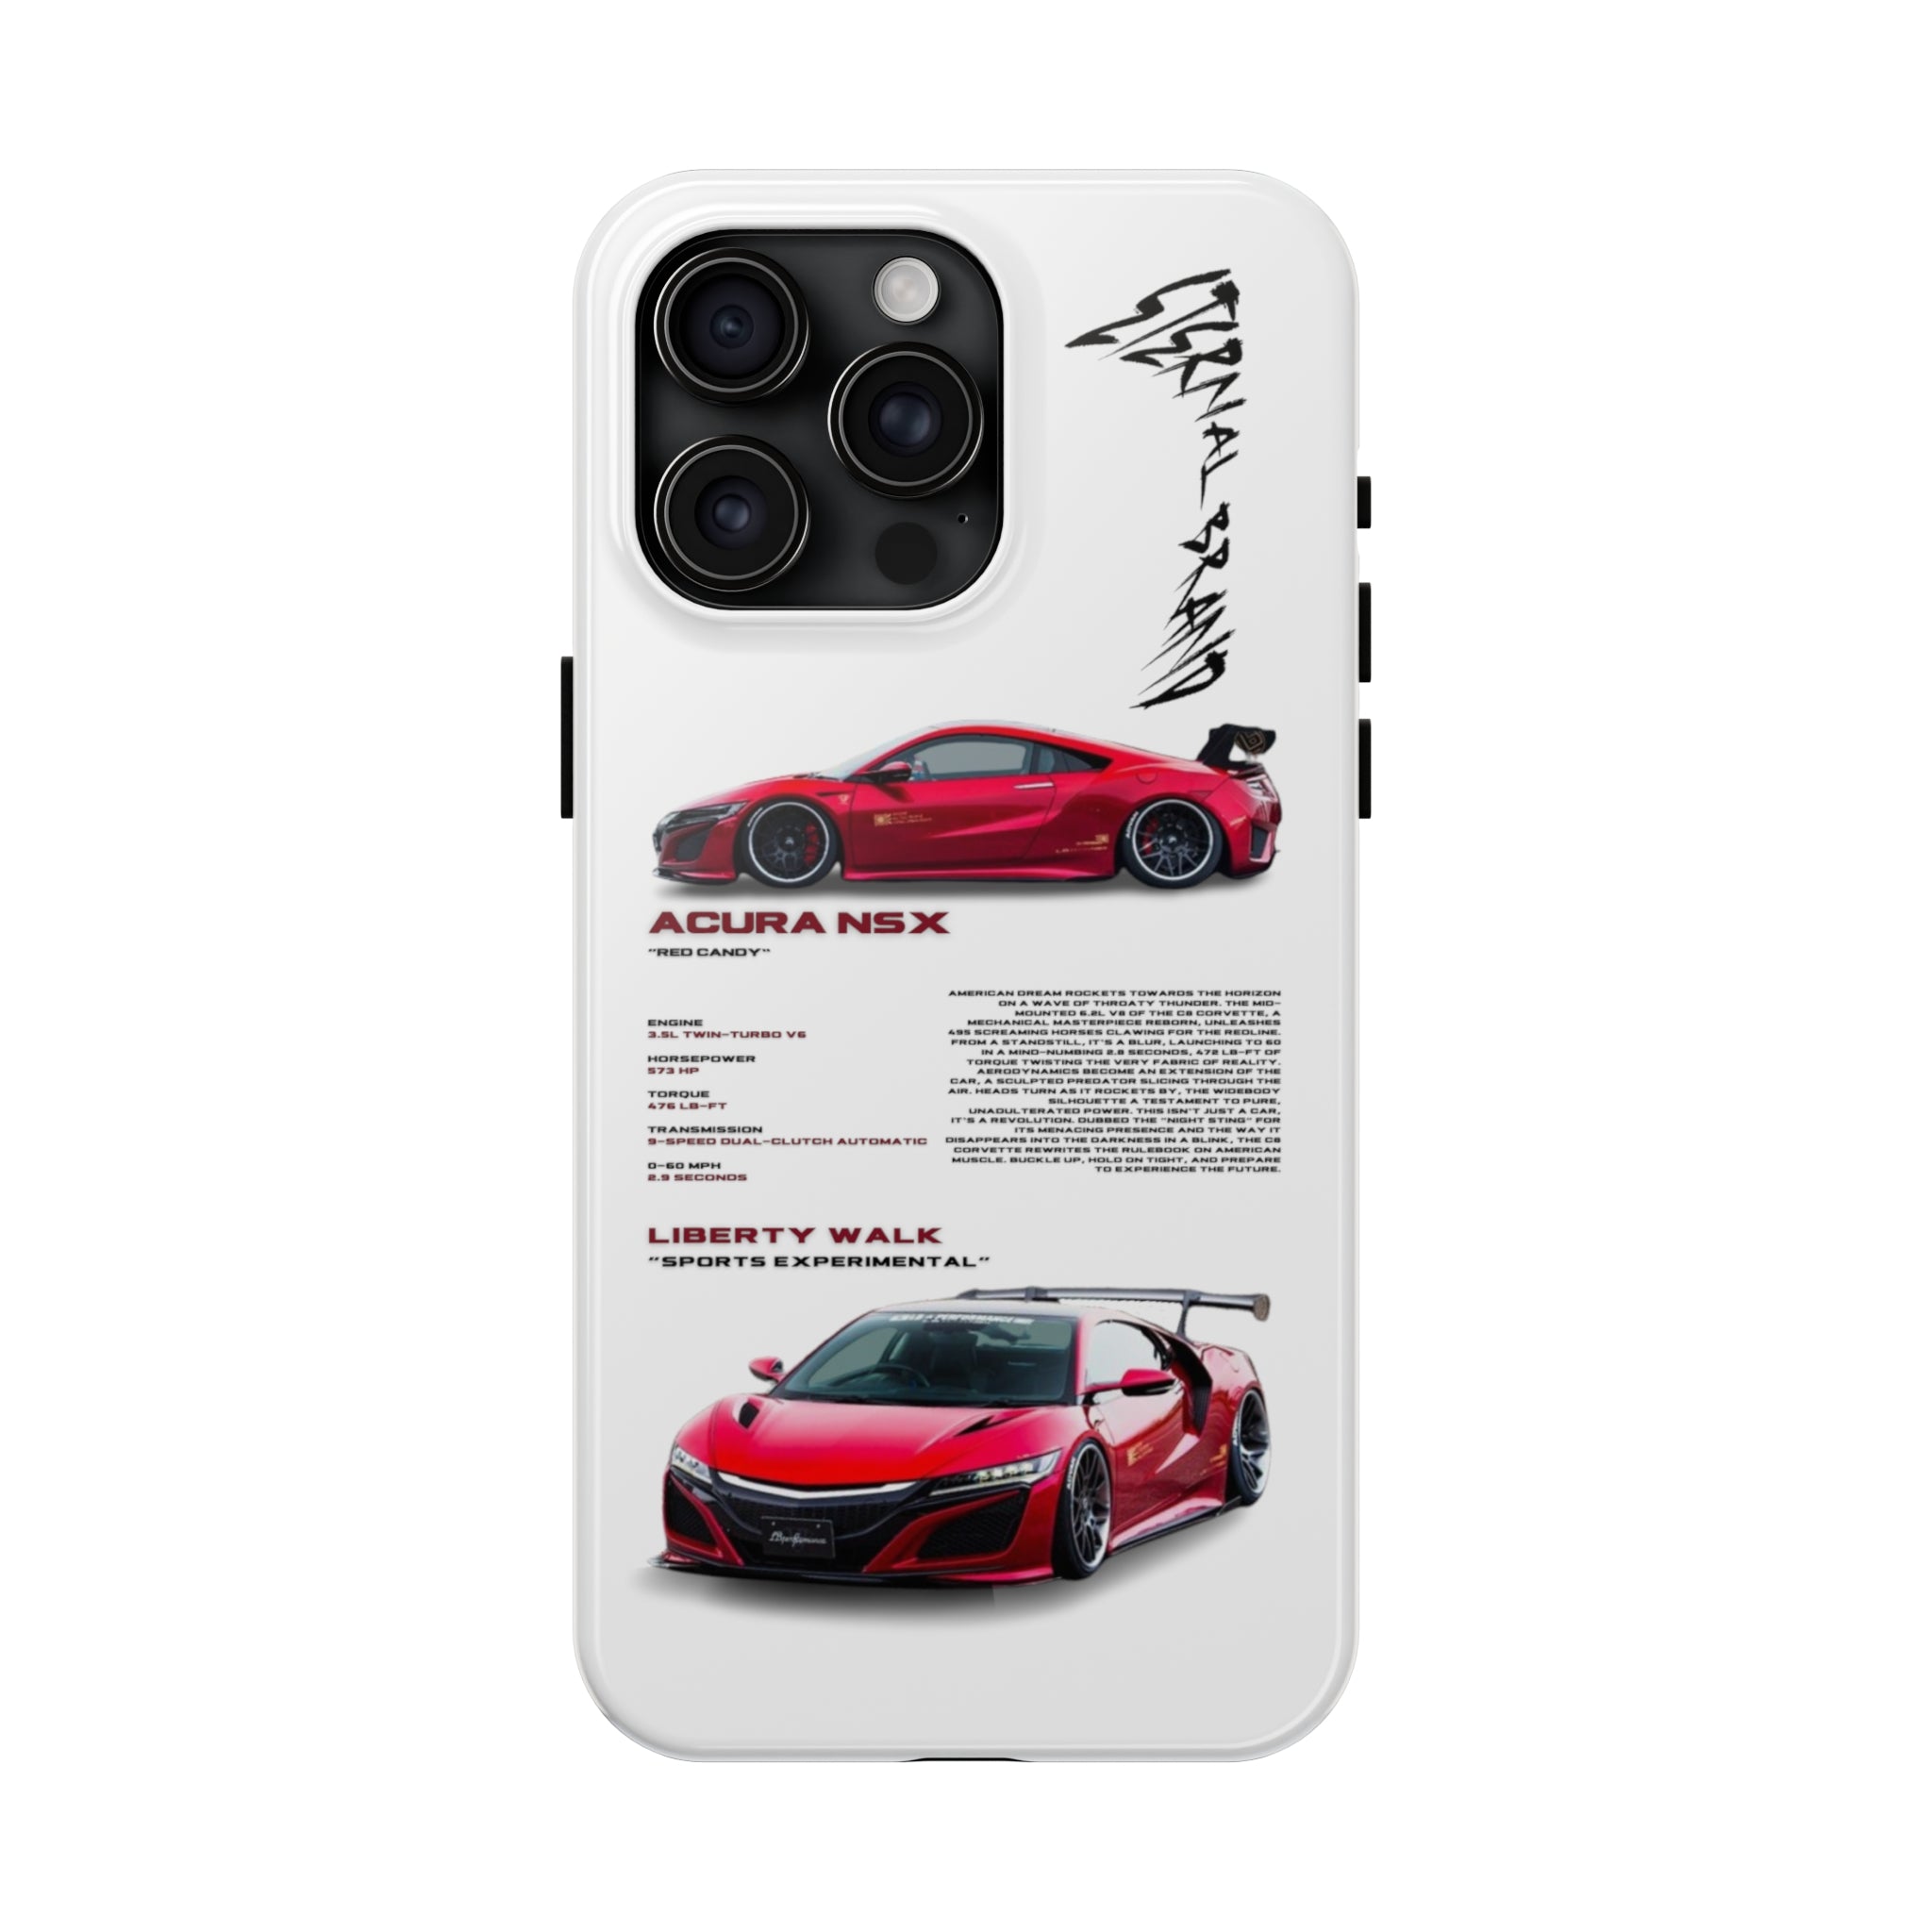 Acura NSX "Candy Red"